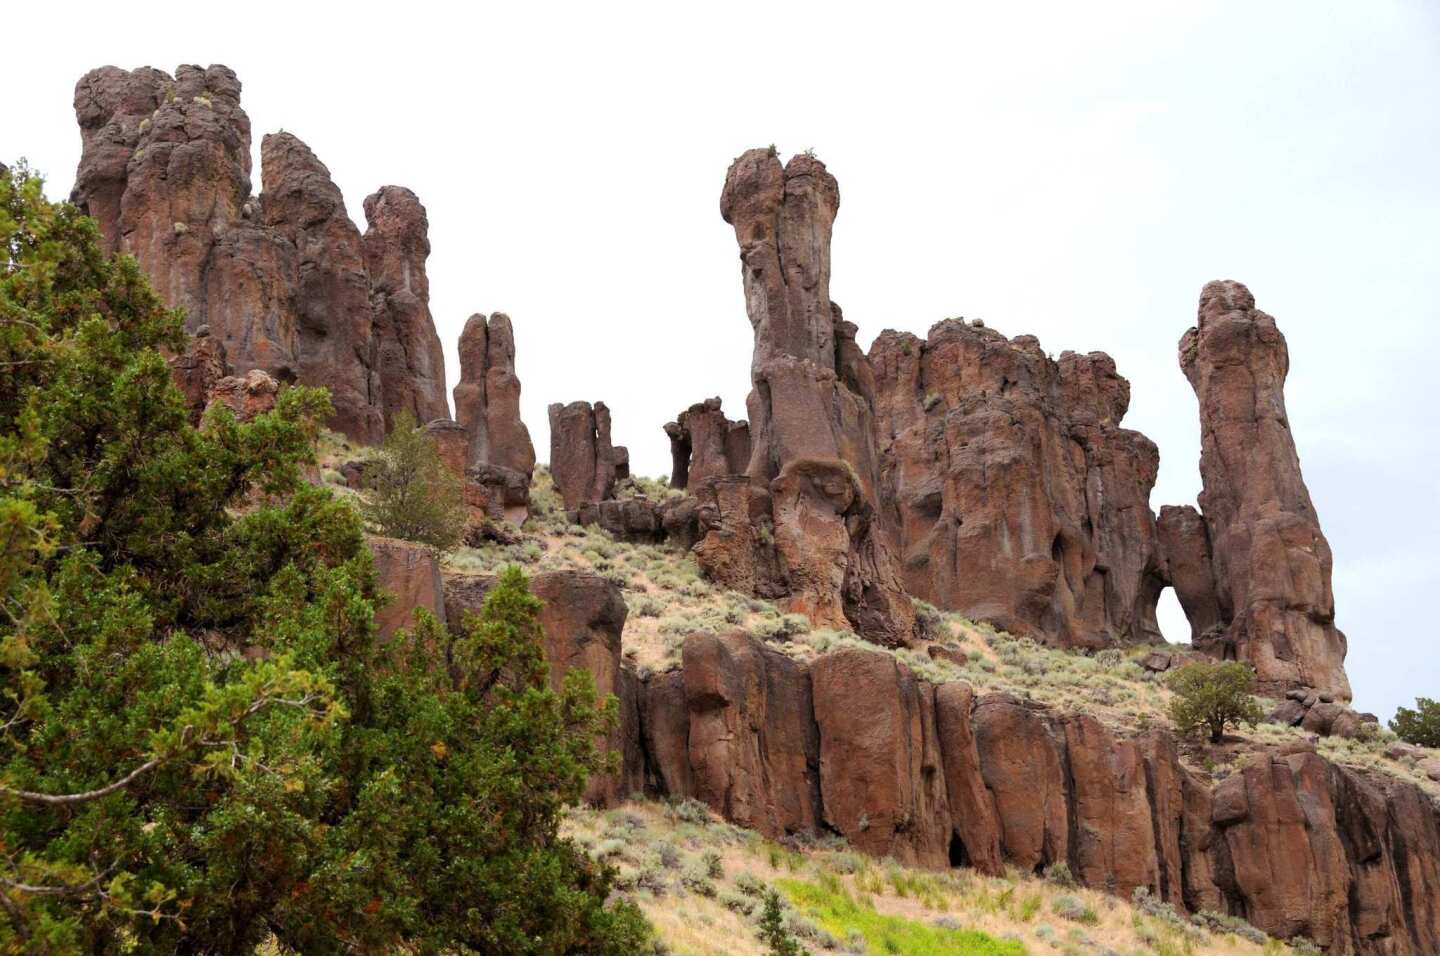 The bizarre pillars of rock are one reason to venture into the northeast Nevada wilderness area. Other draws: pristine air quality, birding and outdoor recreation.